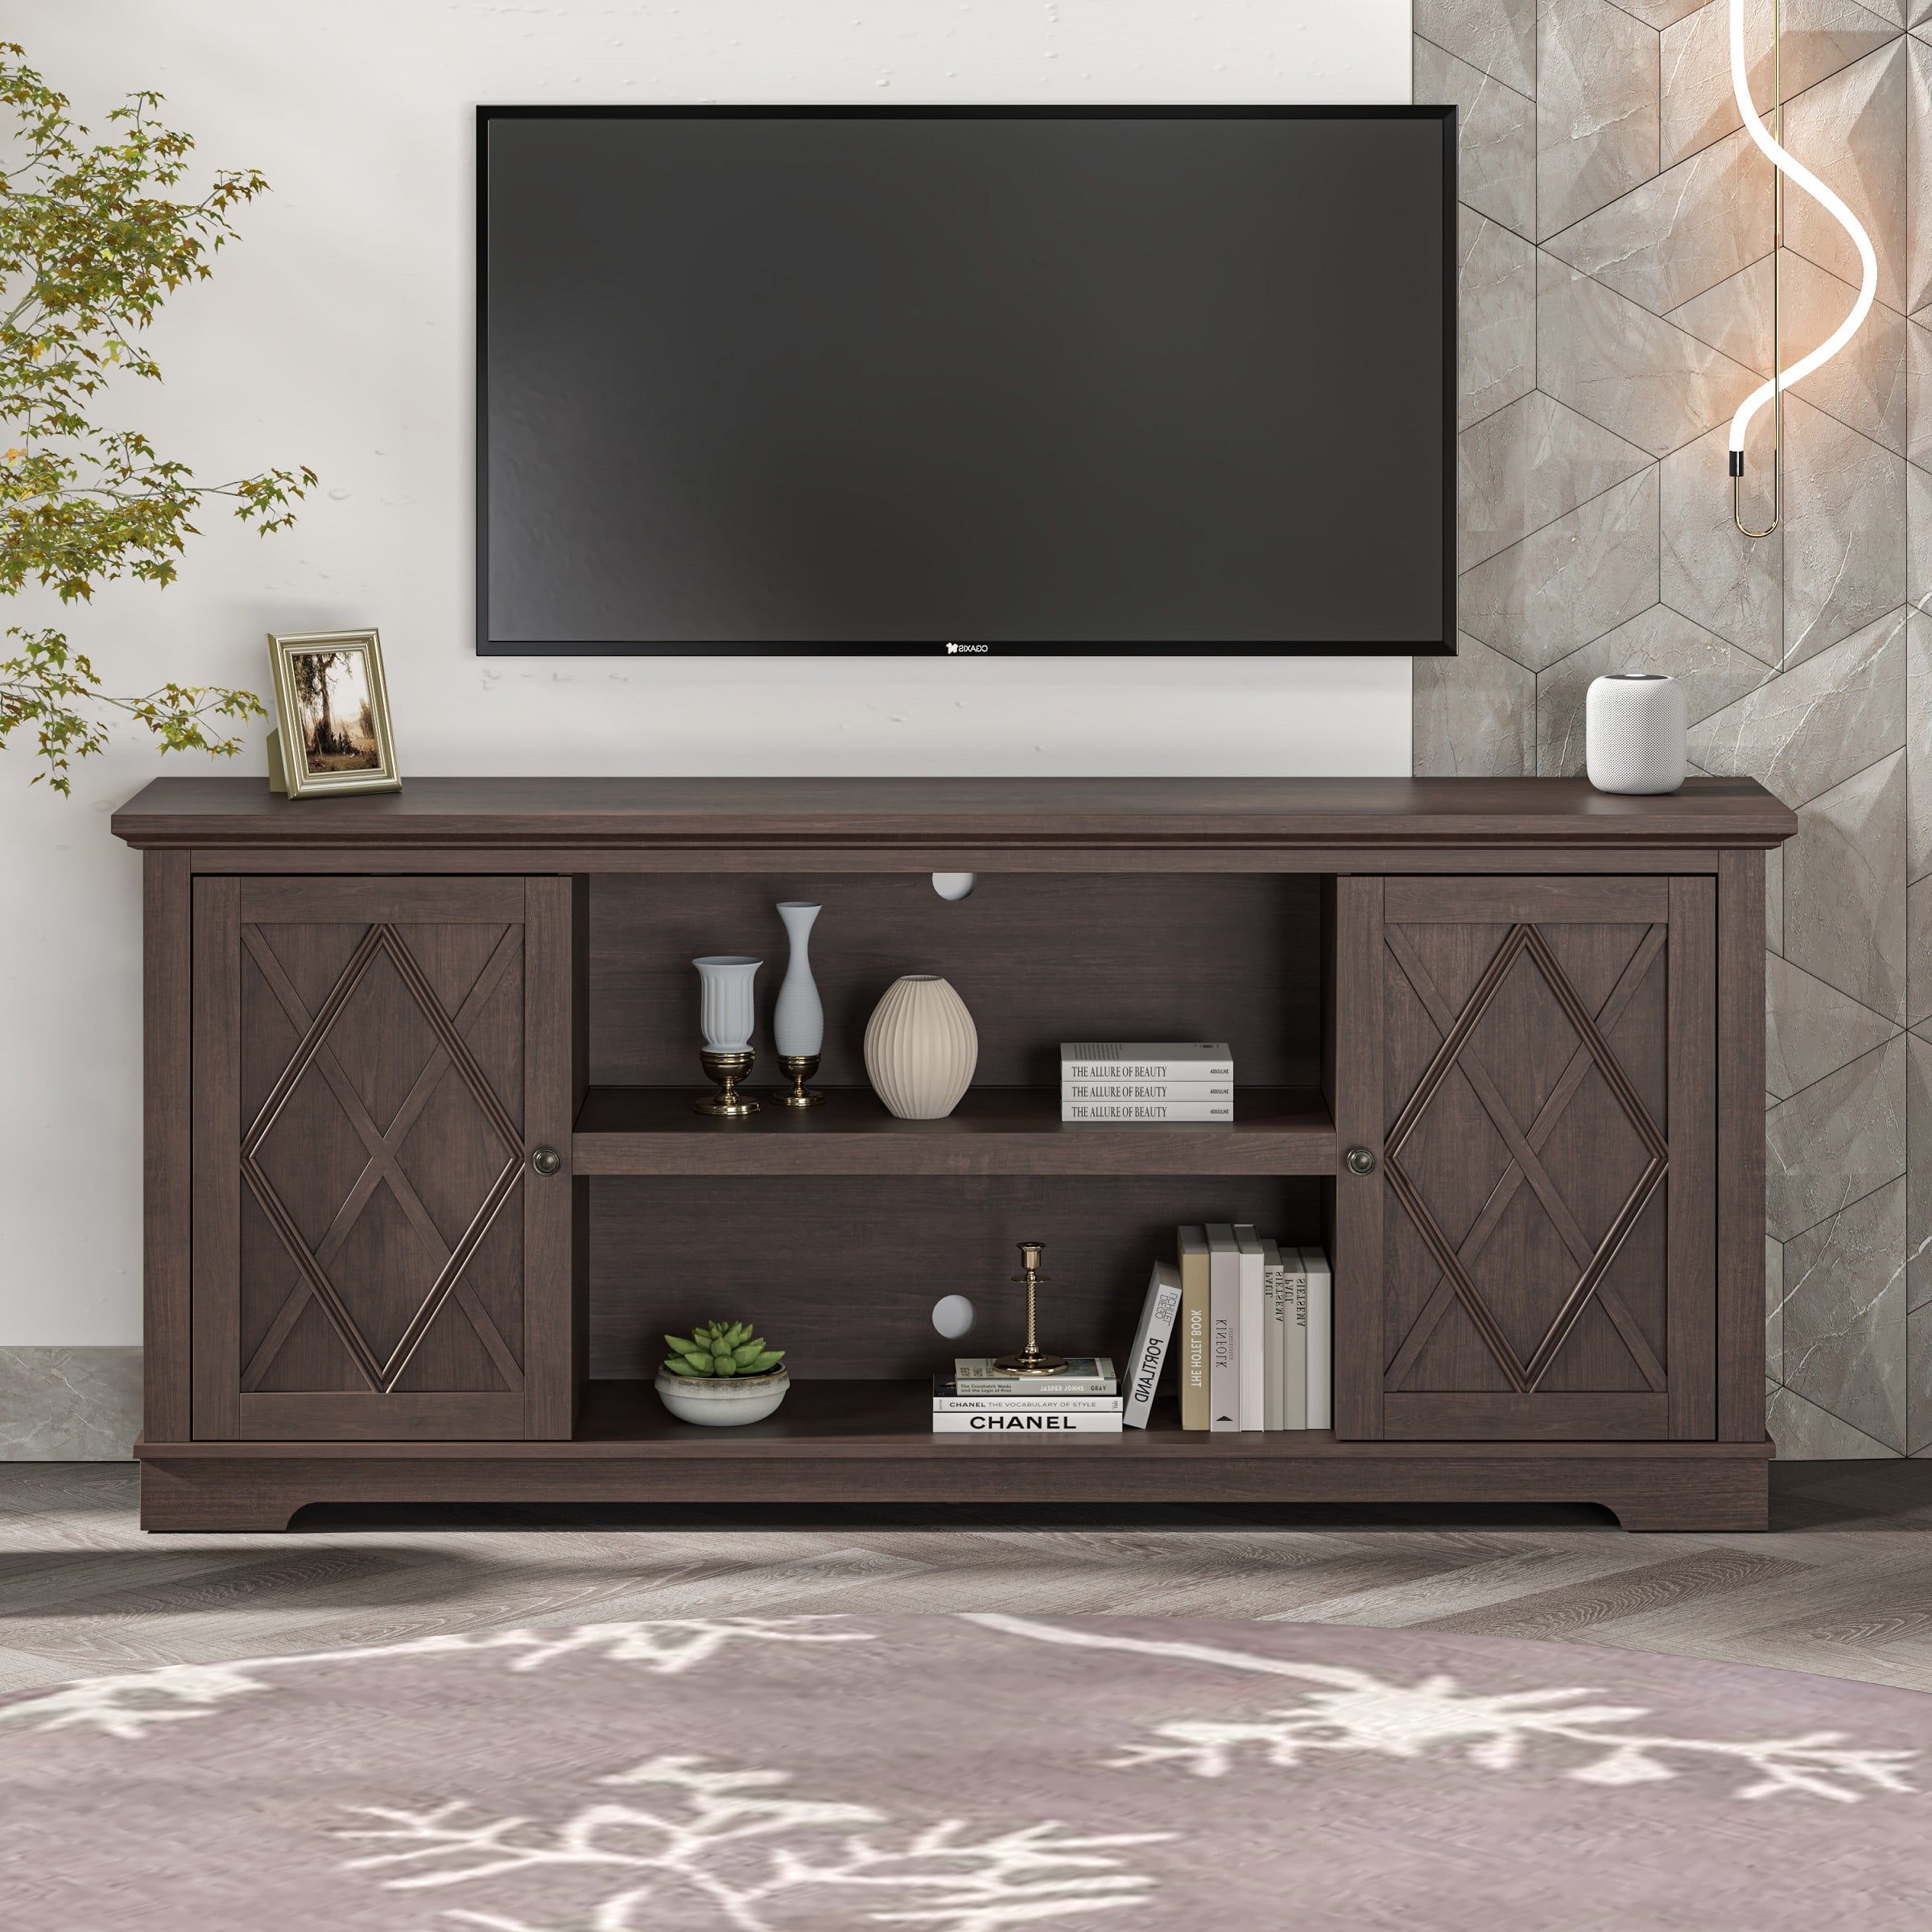 Festivo 70" Farmhouse Tv Stand Console For Tvs Up To 75 Inch – Brown – Easy  Assembly, Cable Management, Adjustable Shelves – Walmart Throughout Oaklee Tv Stands (Gallery 10 of 20)